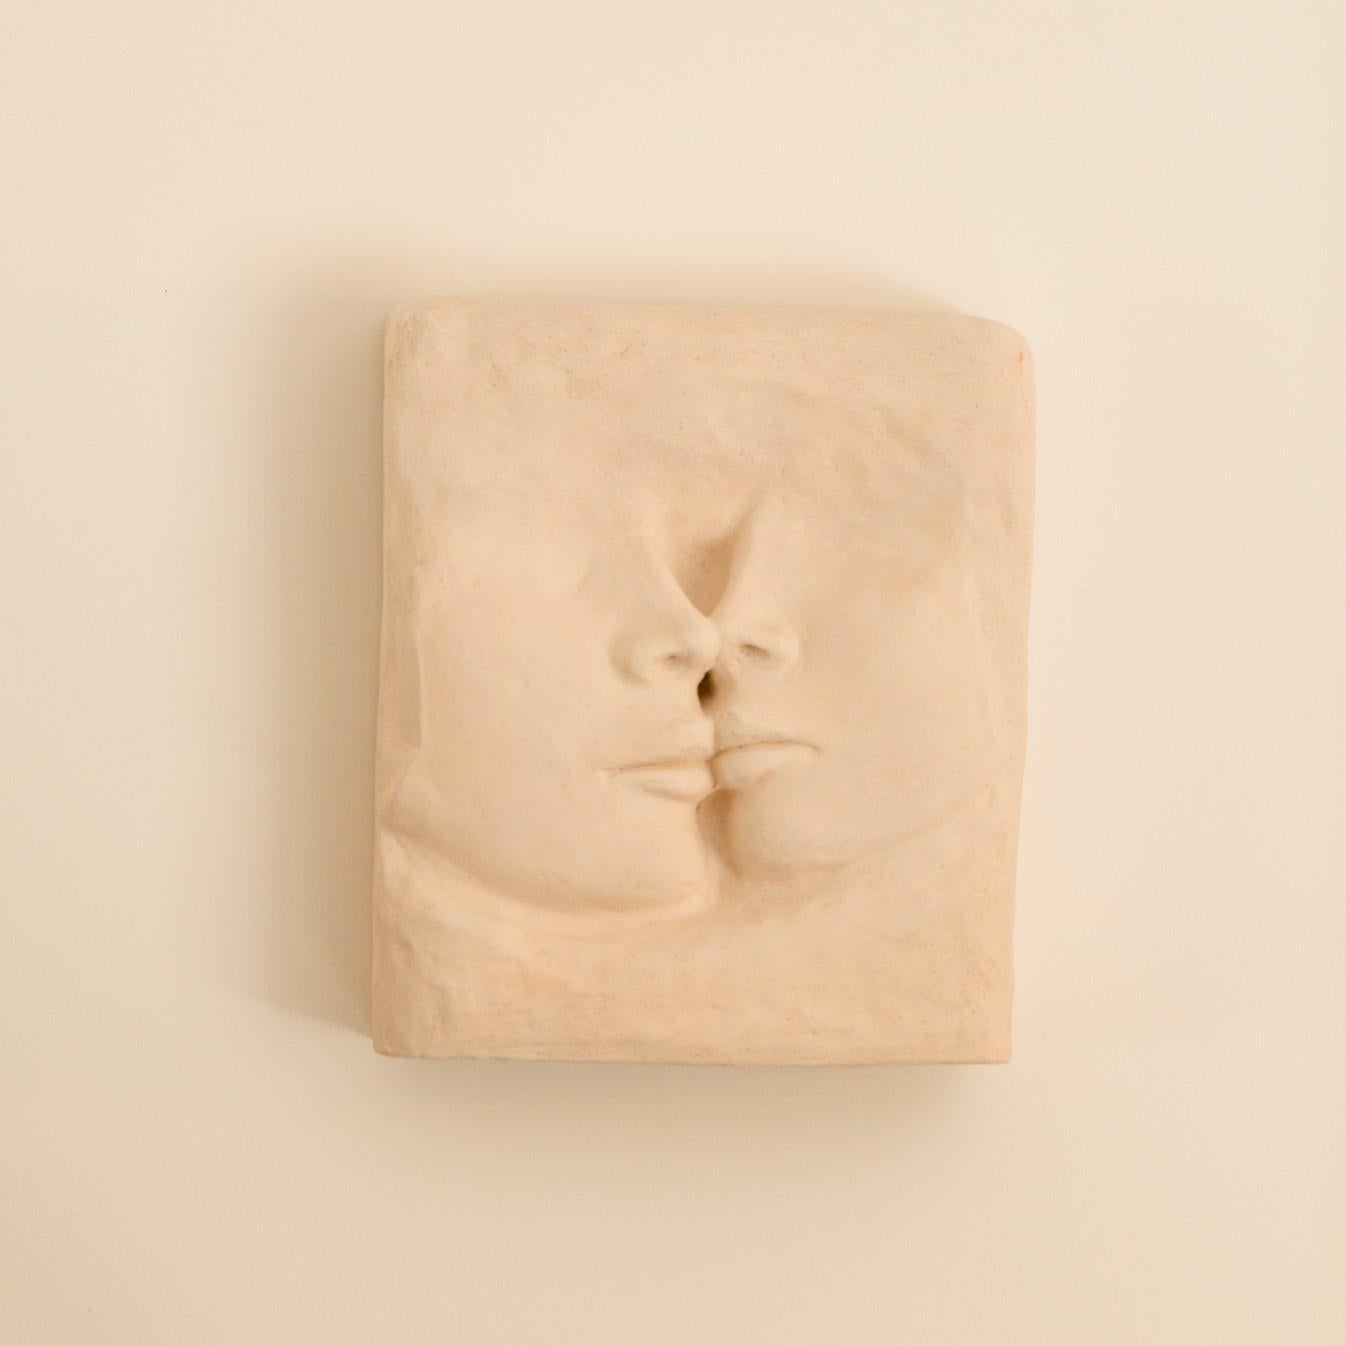 Le Baiser Sconce by Di Fretto
Dimensions: W 23 x D 9 x H 28 cm
Materials: White Faience (not glazed)

The Le Baiser wall light is an Italian-inspired bas relief fitting into a contemporary universe: the bas relief becomes a wall light.

It is a